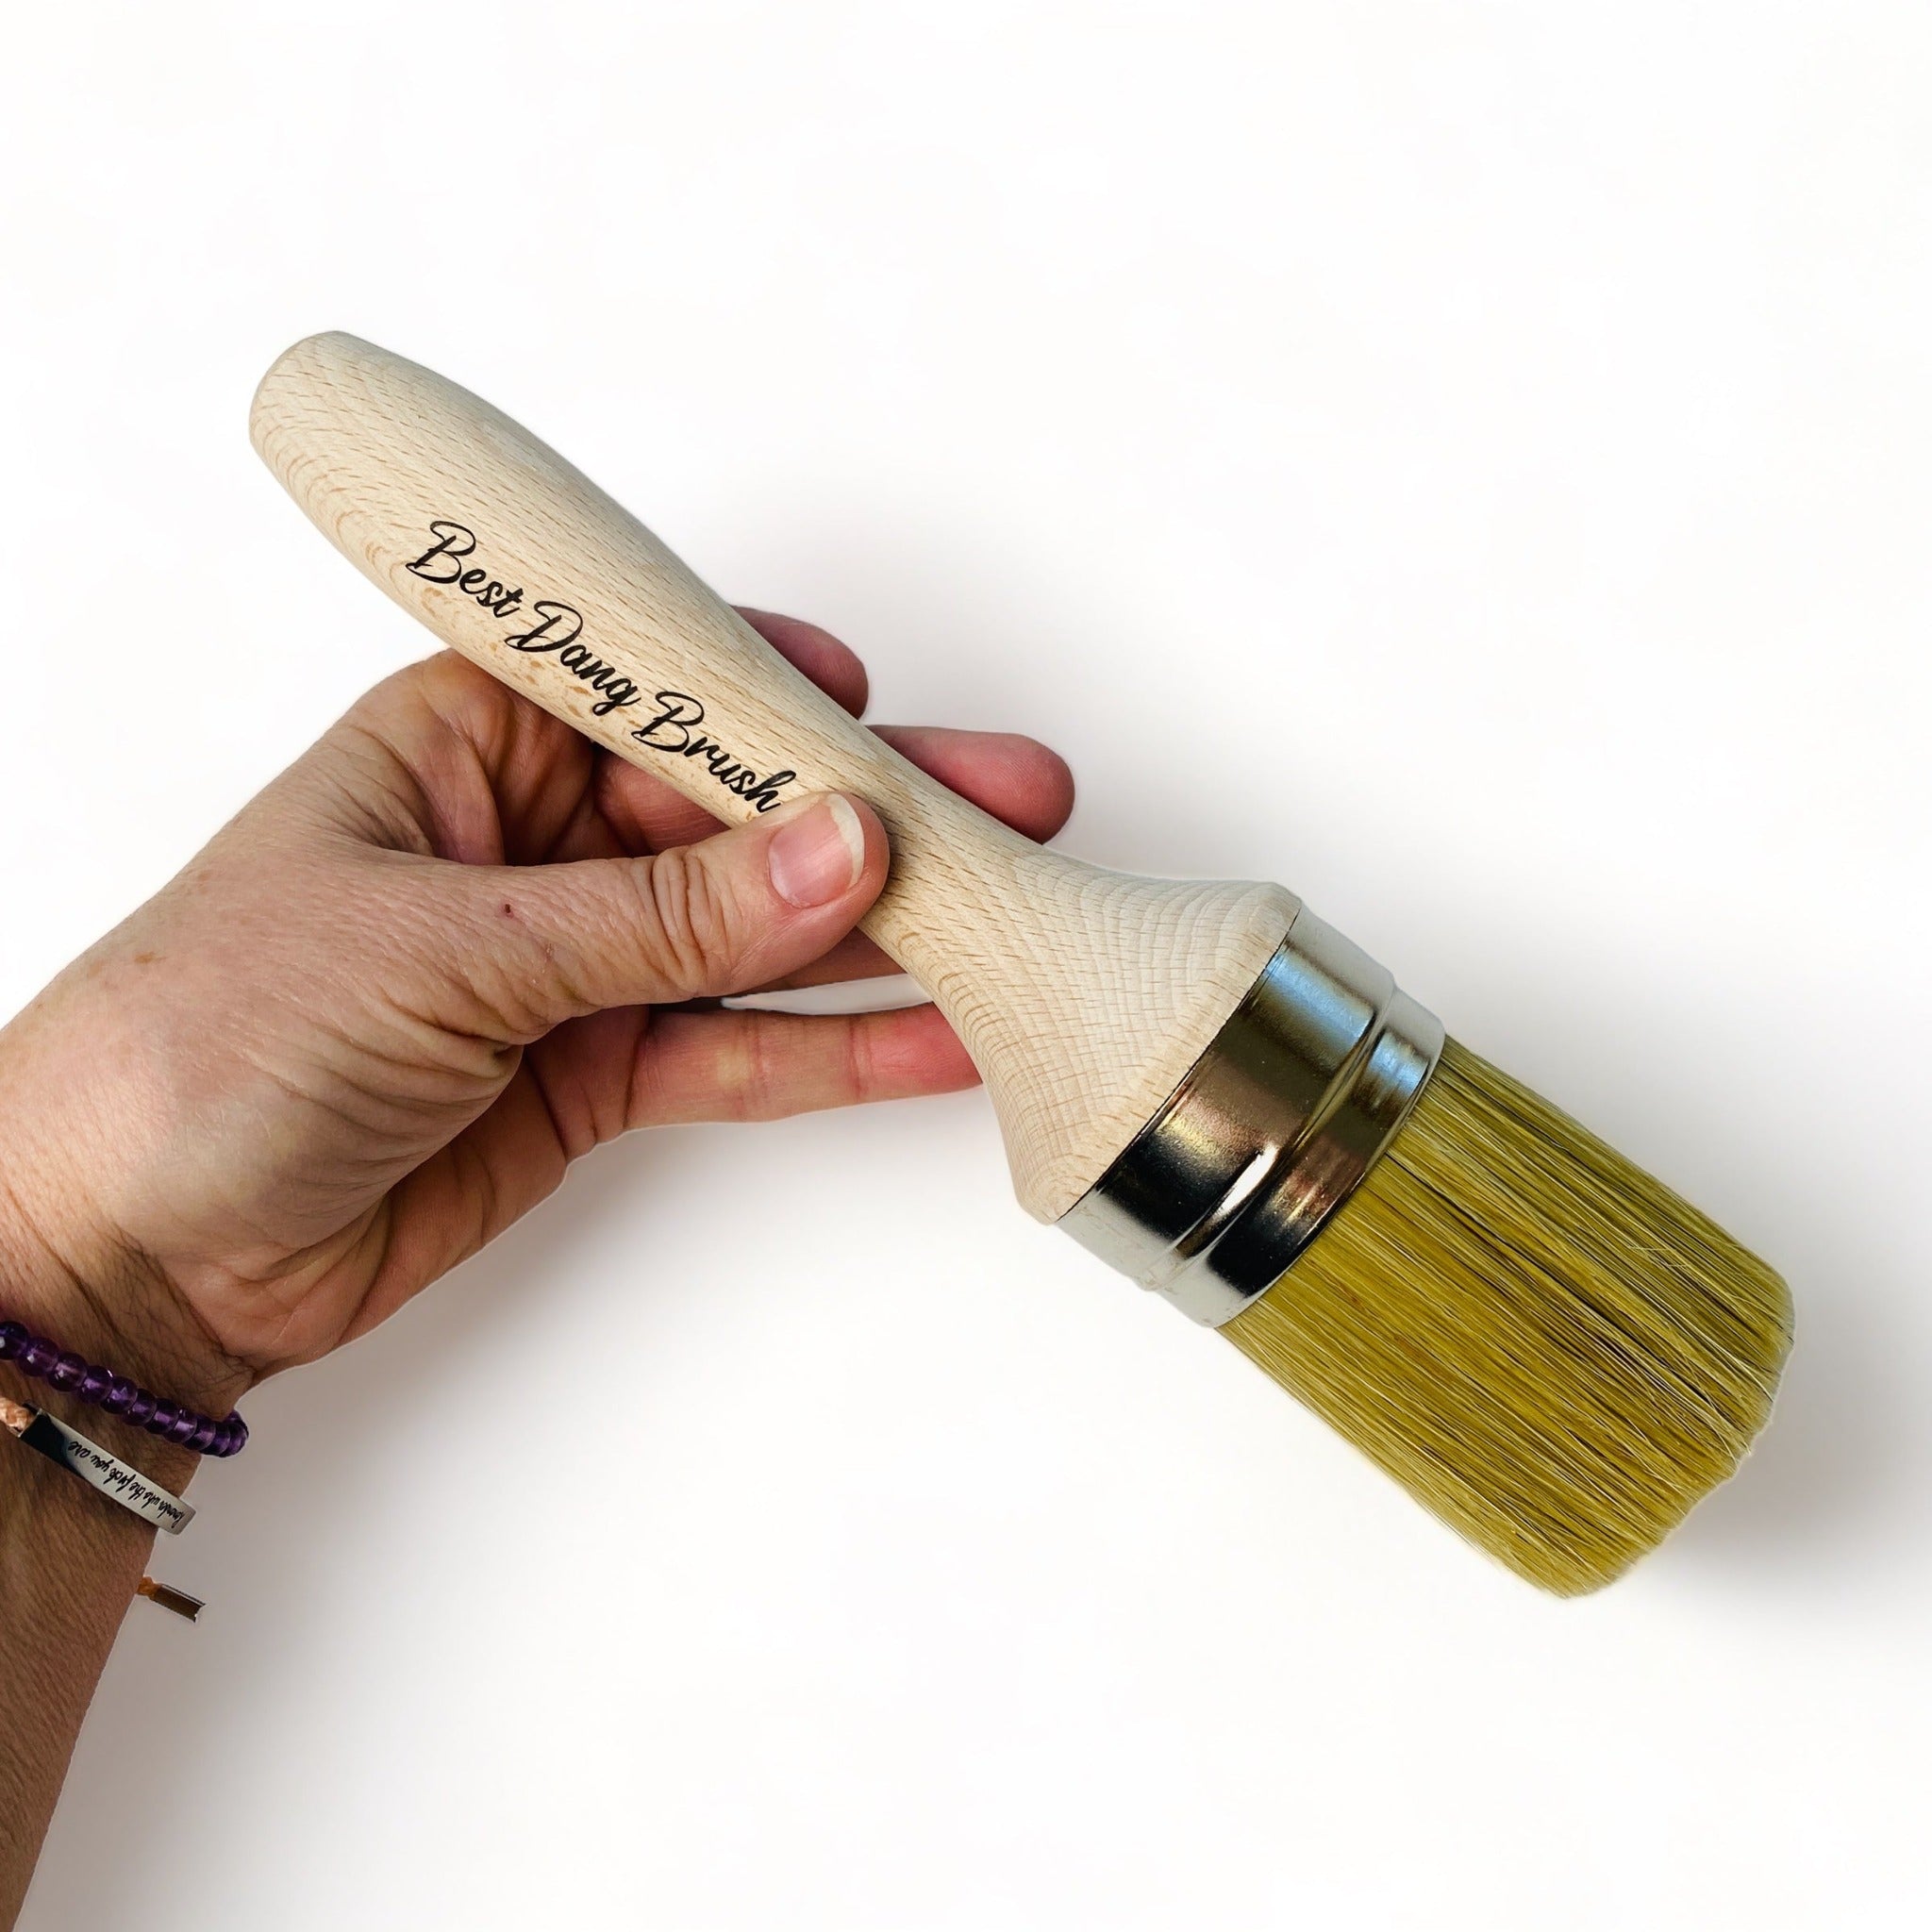 A hand holding Dixie Belle Paint's Best Dang Brush against a white background. This is a 2-inch natural blend that is excellent for painting, blending, and/or waxing.